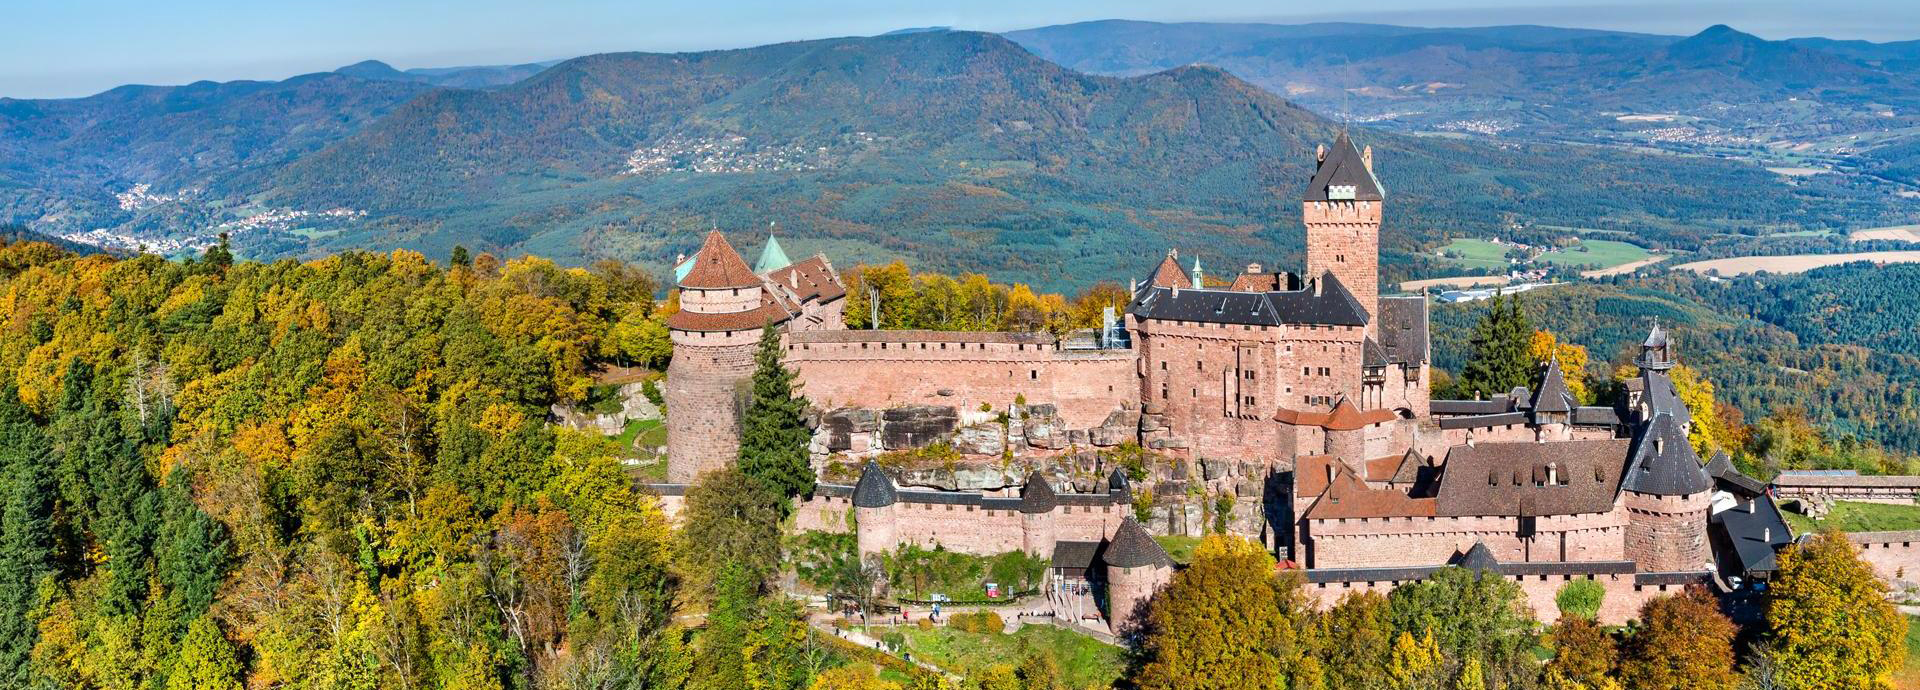 Château du Haut-Koenigsbourg is a must-see during a stay in Alsace.